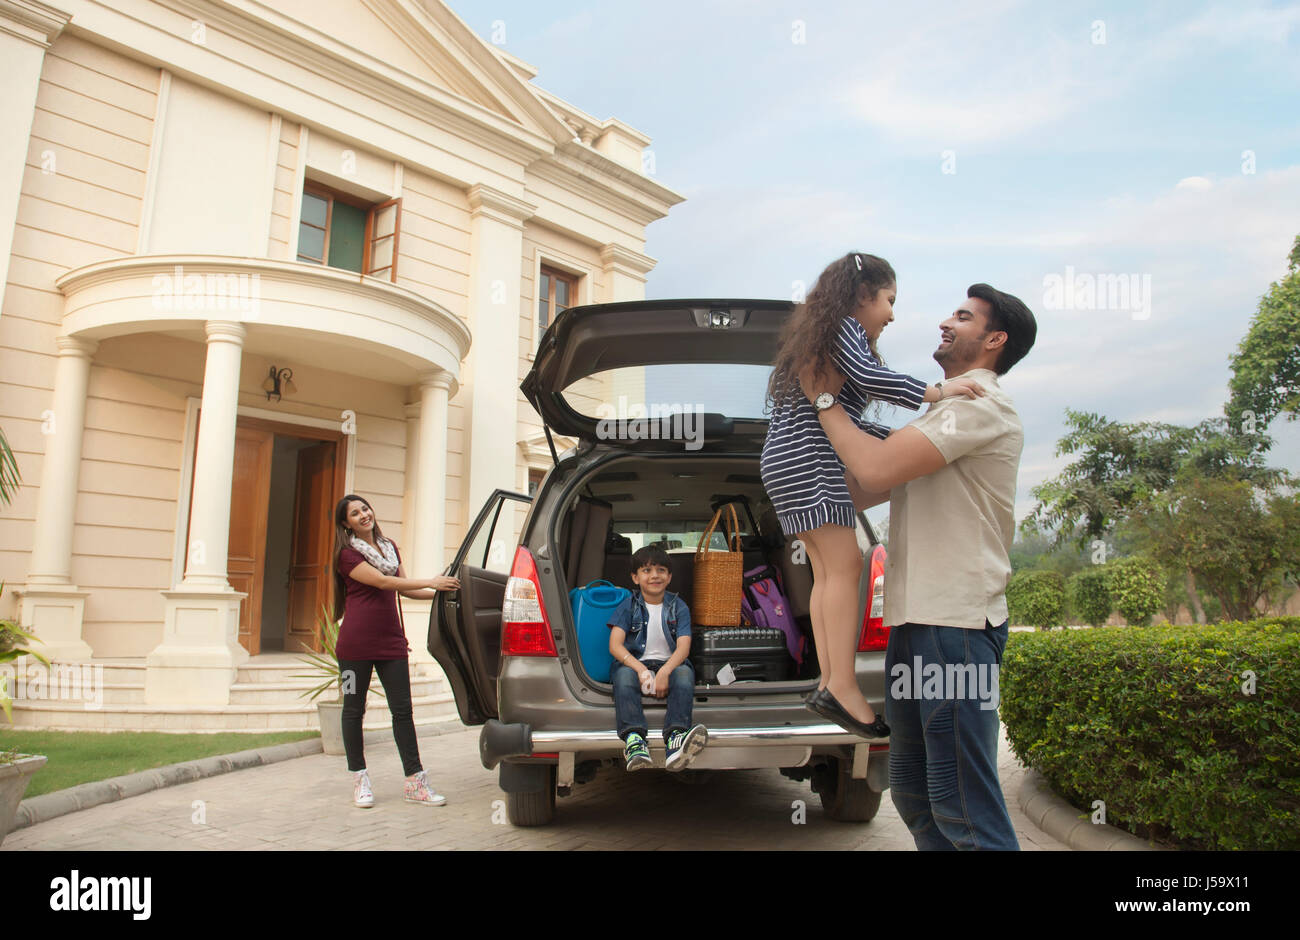 Family standing outdoors by car father lifting daughter Stock Photo